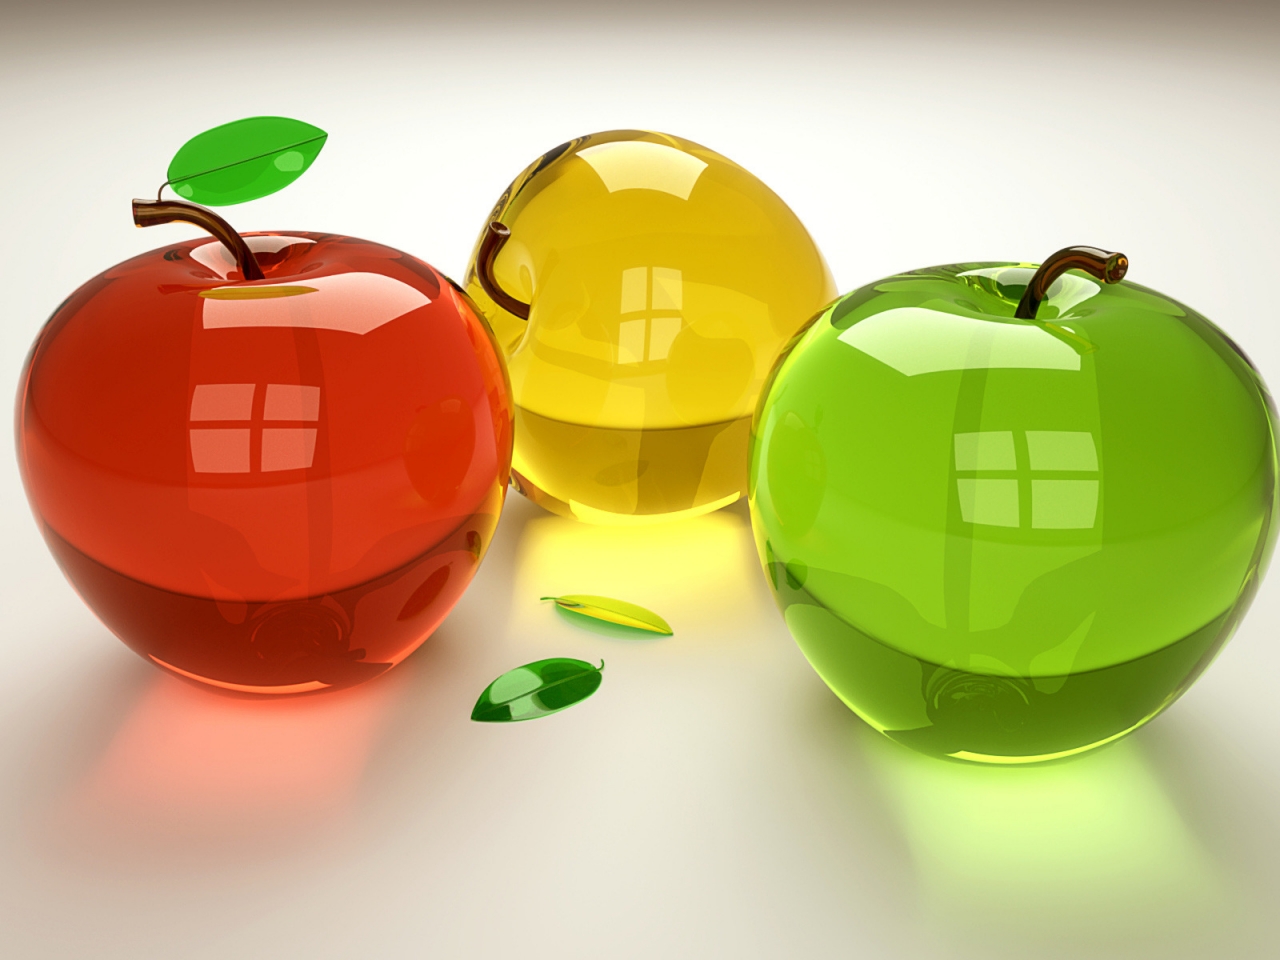 Glass Apples for 1280 x 960 resolution